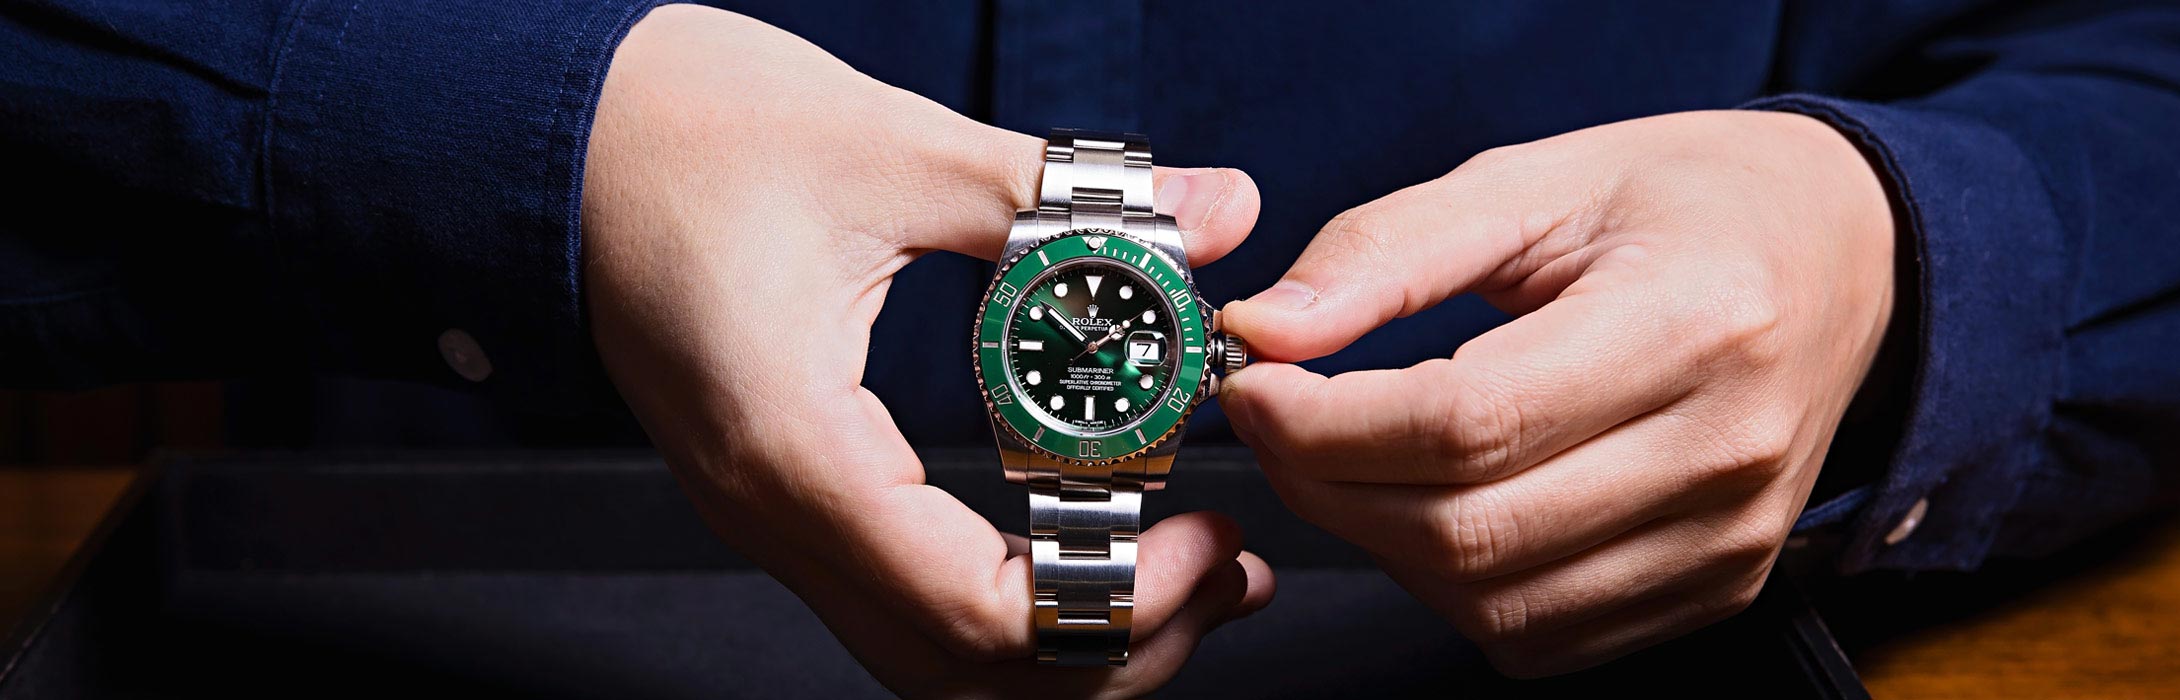 How to set time on Rolex